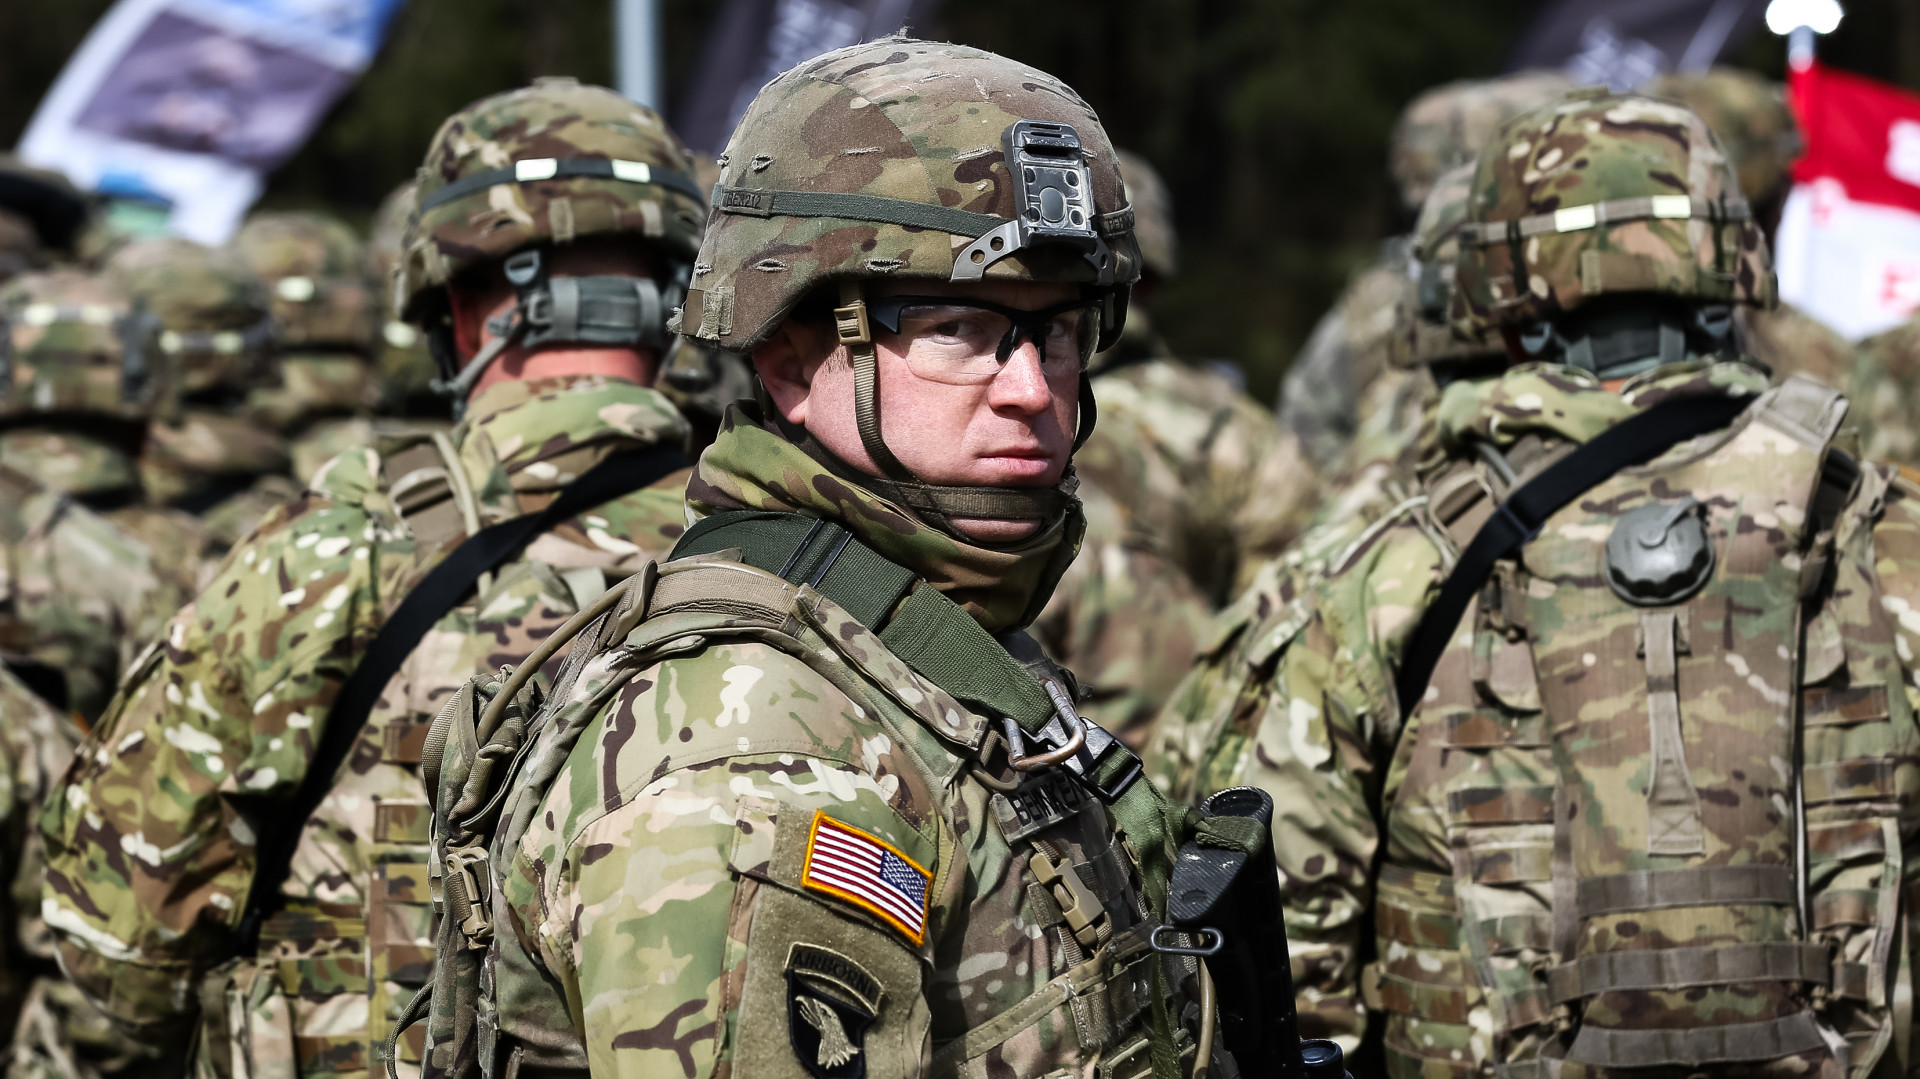 America is allegedly very angry with the Polish media law, and is considering moving its soldiers